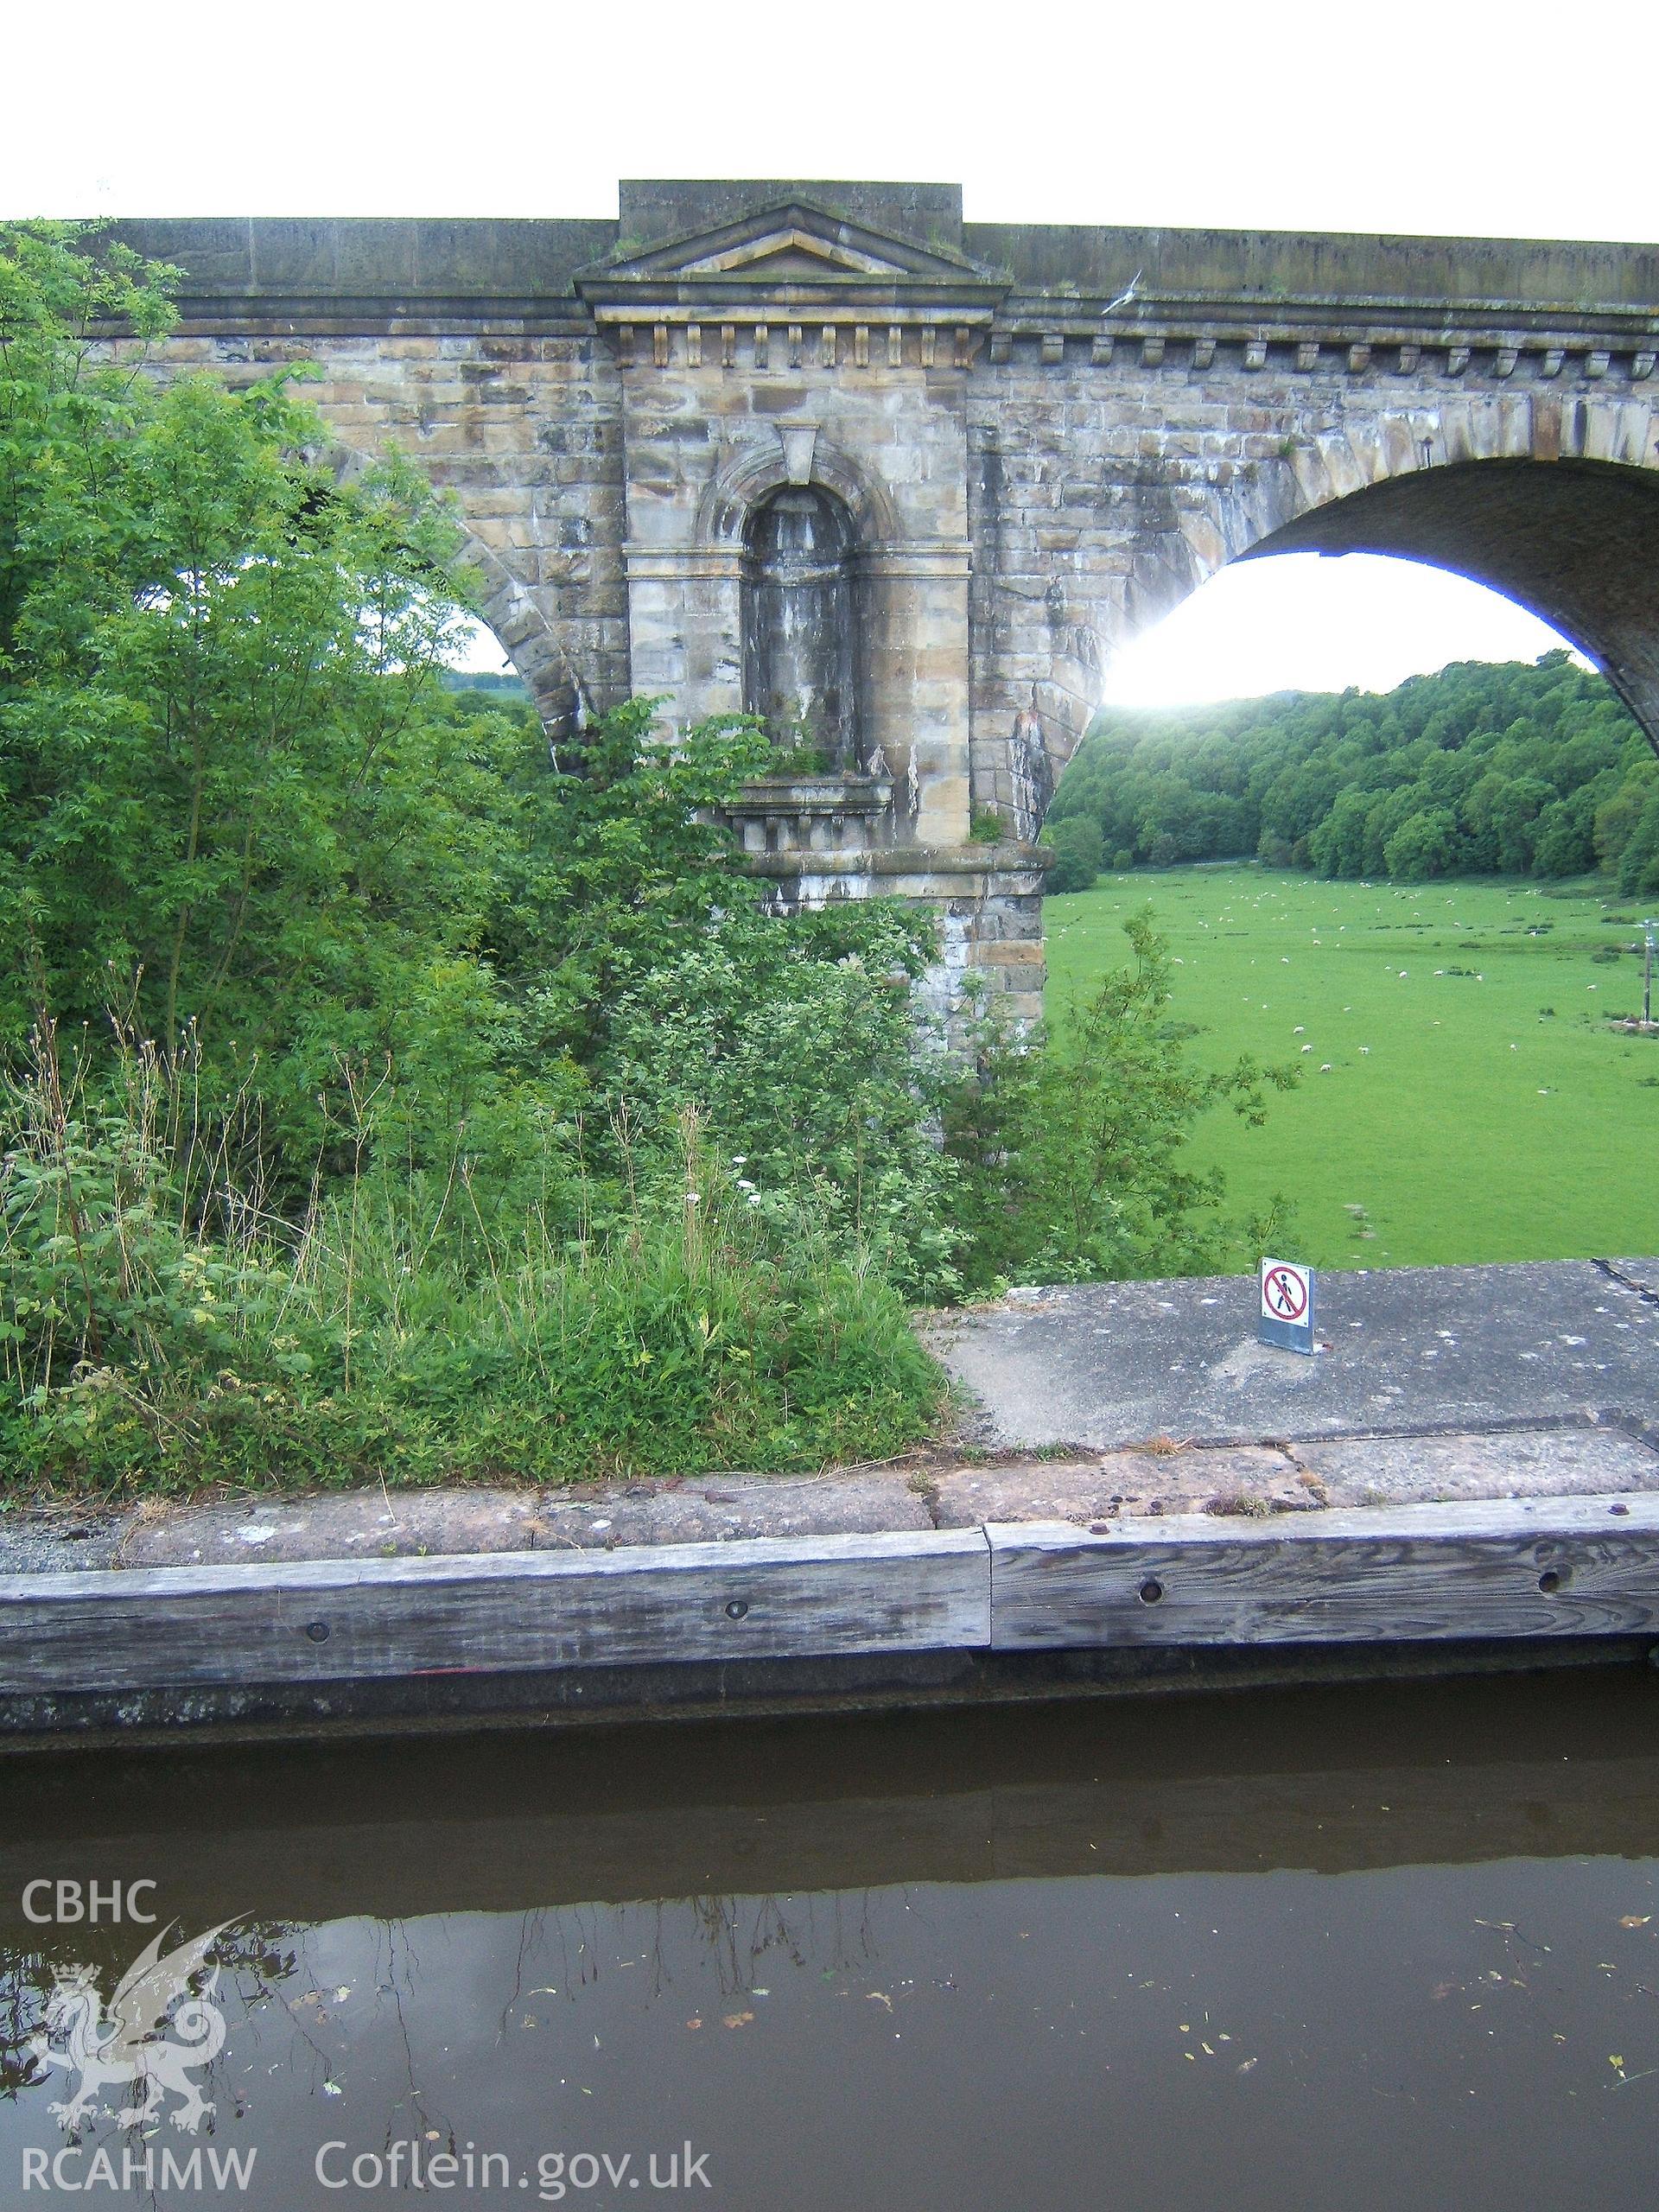 Classical pediment and niche on south-east pier of viaduct.